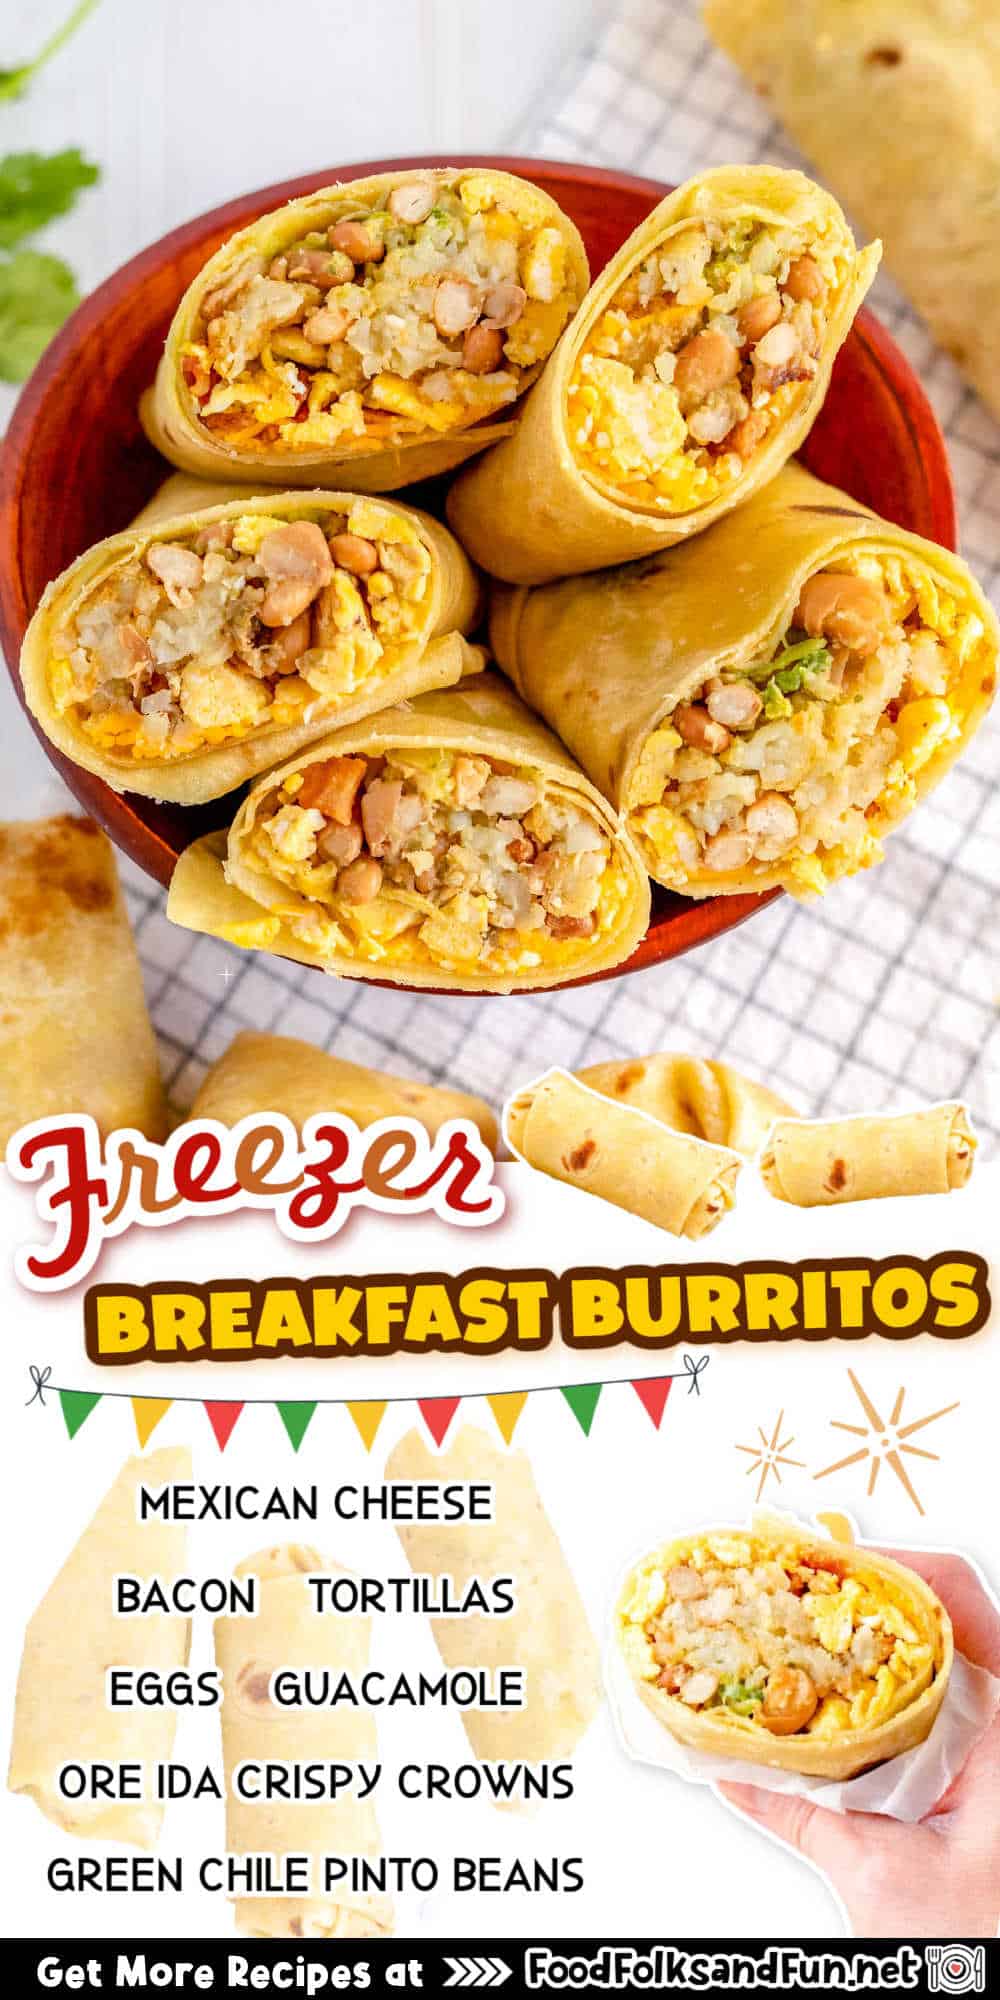 This freezer Breakfast Burrito recipe makes burritos that are stuffed with eggs, cheese, bacon, crispy potatoes, guacamole, and pinto beans. via @foodfolksandfun